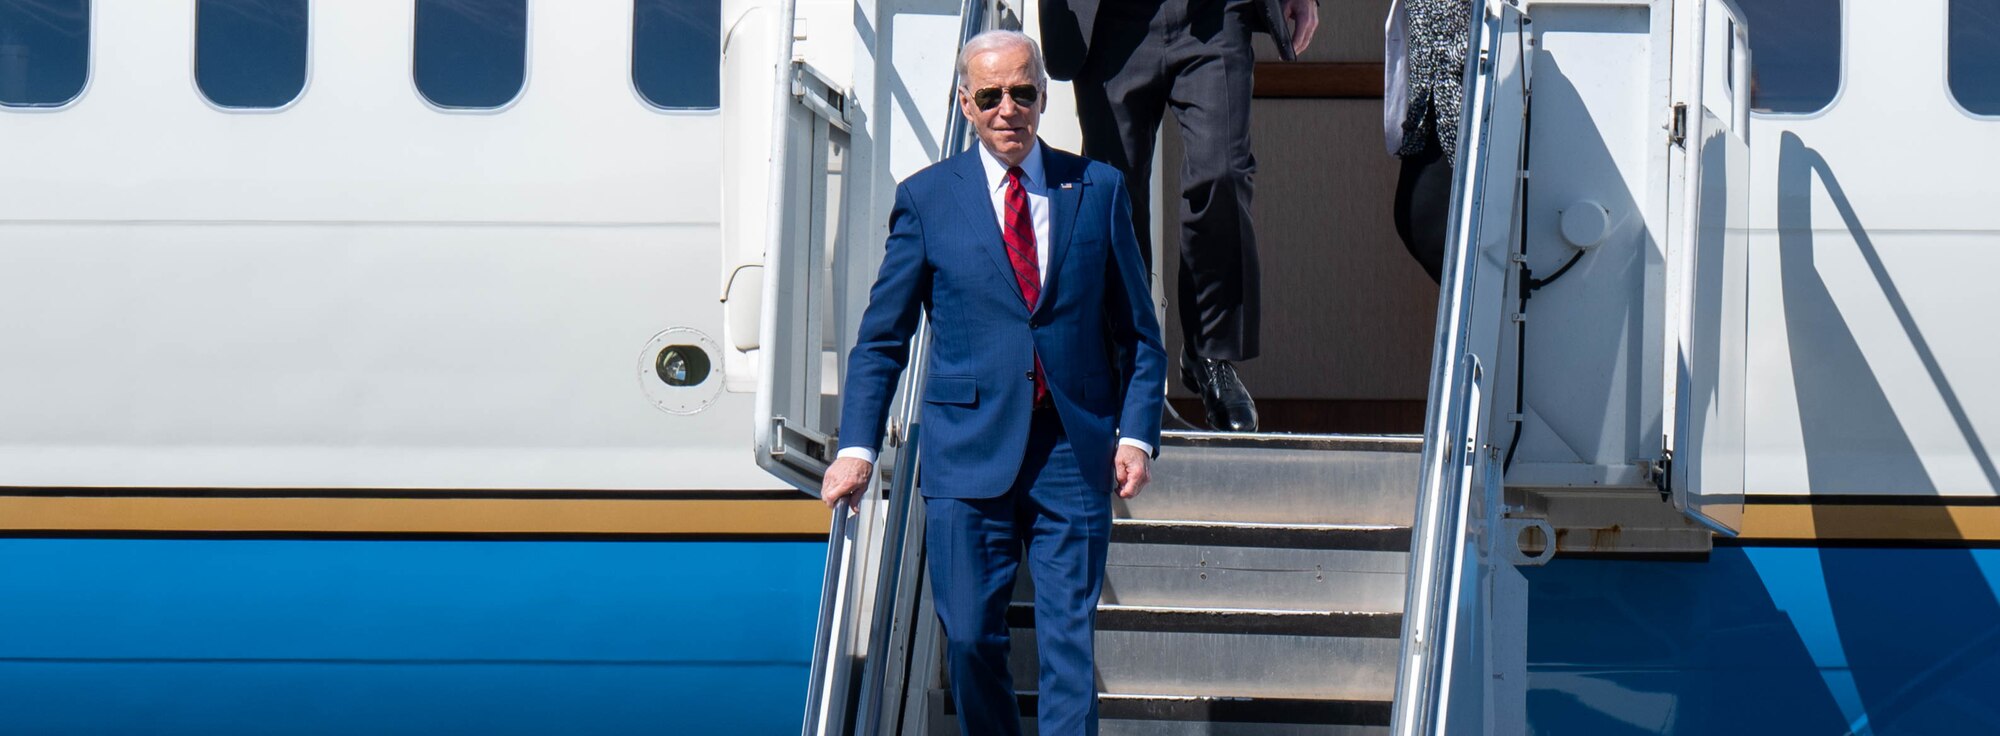 President Joe Biden arrives at Maxwell Air Force Base, Ala., March 5, 2023. Maxwell Air Force Base provided air-ground support that aided safe and premier travel during the president's visit to commemorate the 58th anniversary of Bloody Sunday.